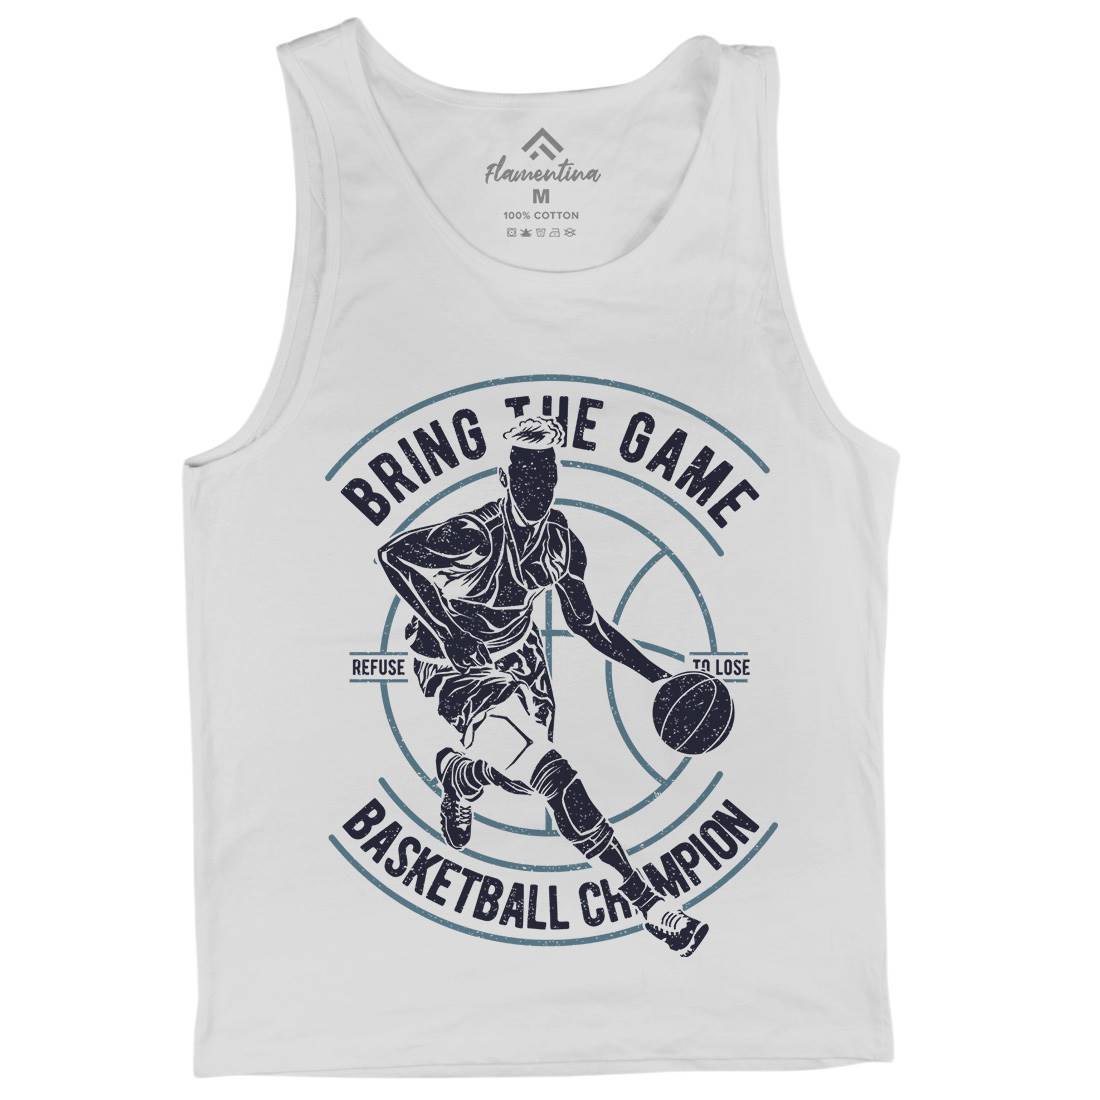 Bring The Game Mens Tank Top Vest Sport A627